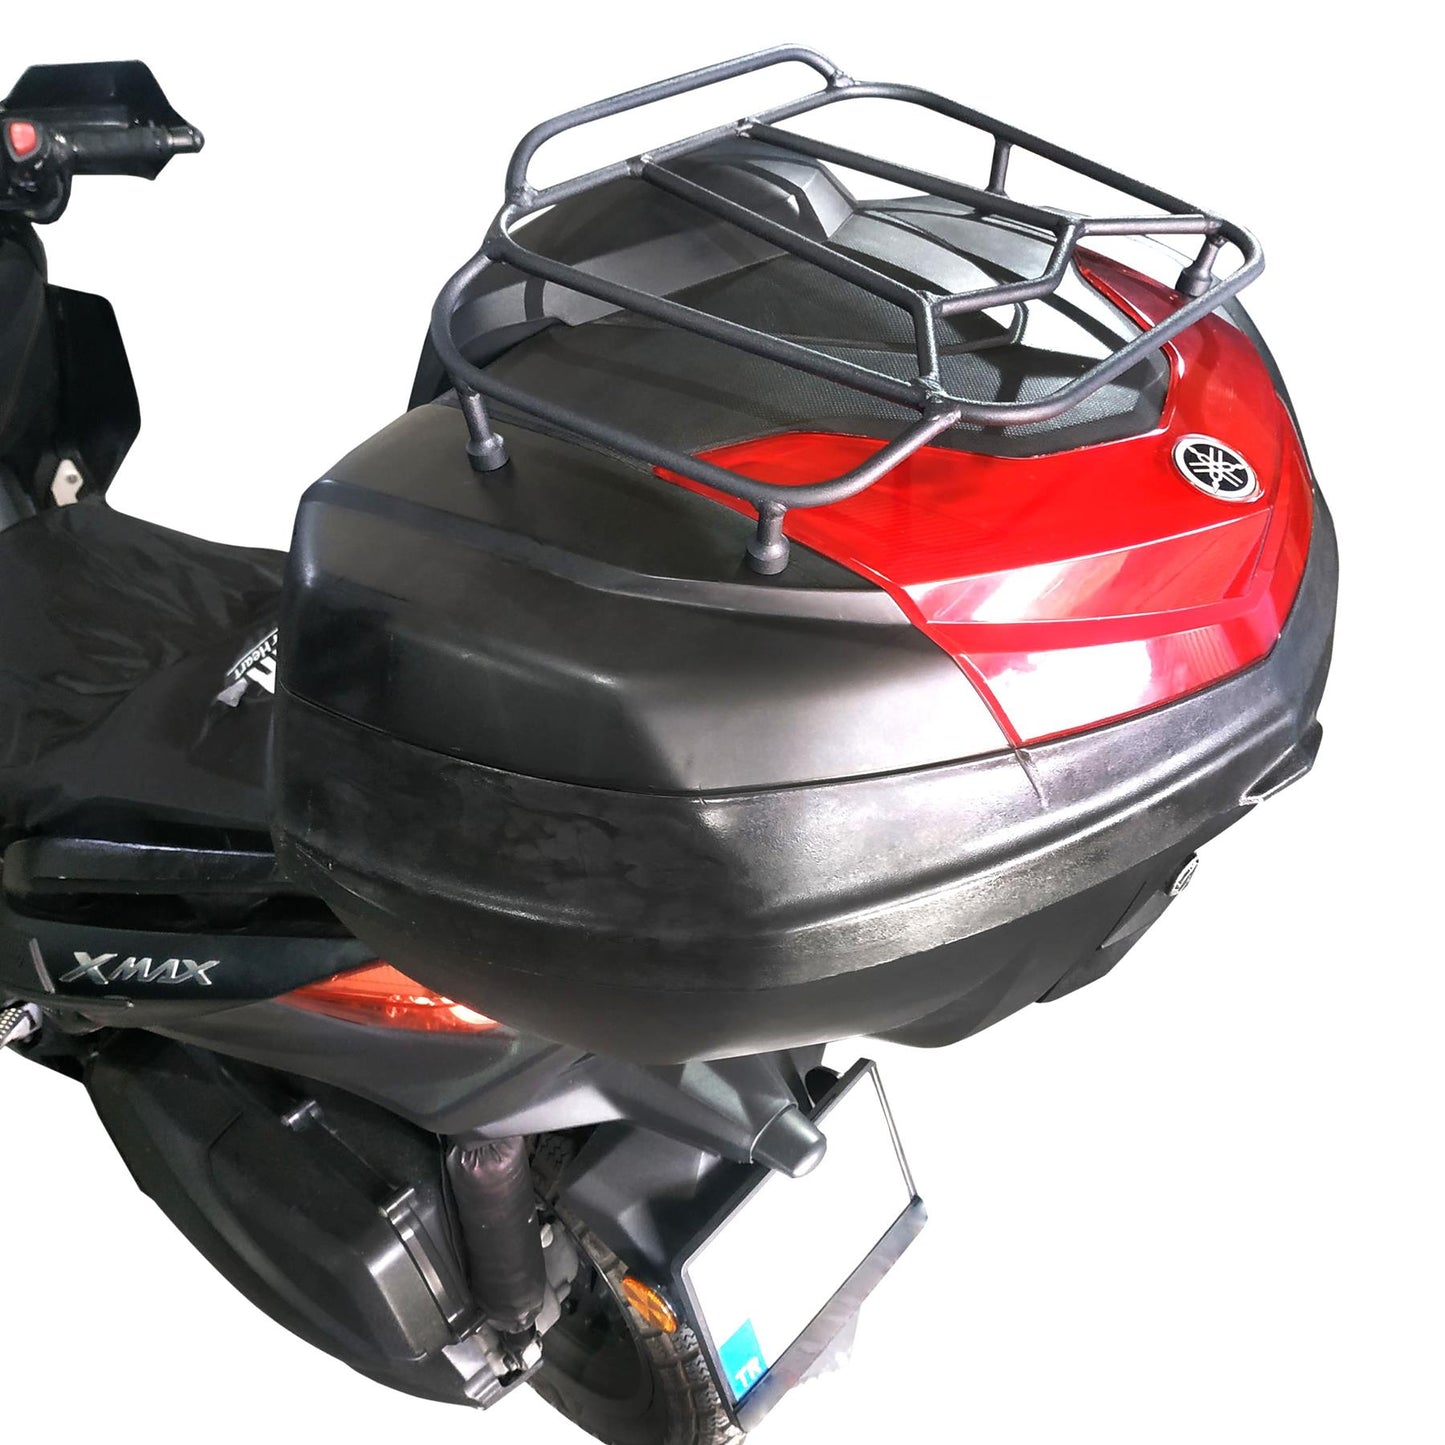 Metal top rack for top box compatible with Yamaha genuine 50 LT top box